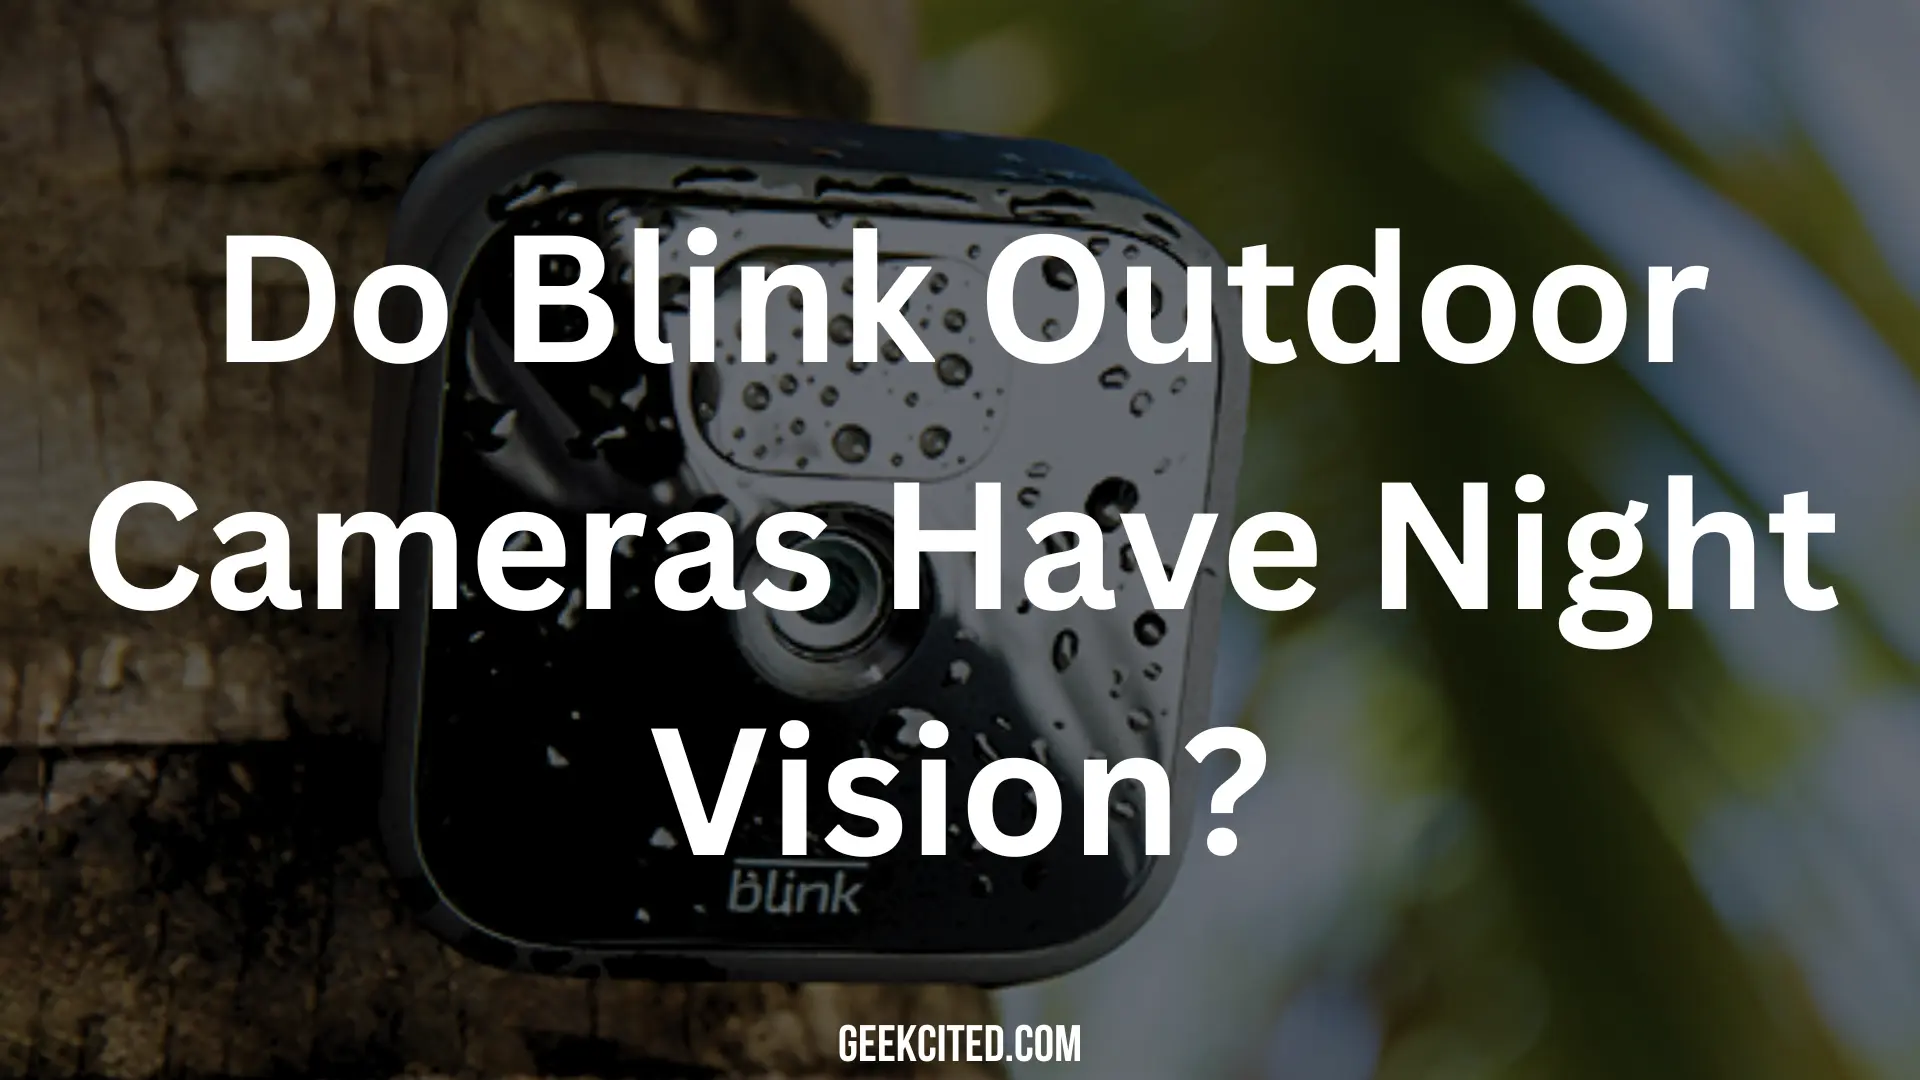 Do Blink Outdoor Cameras Have Night Vision